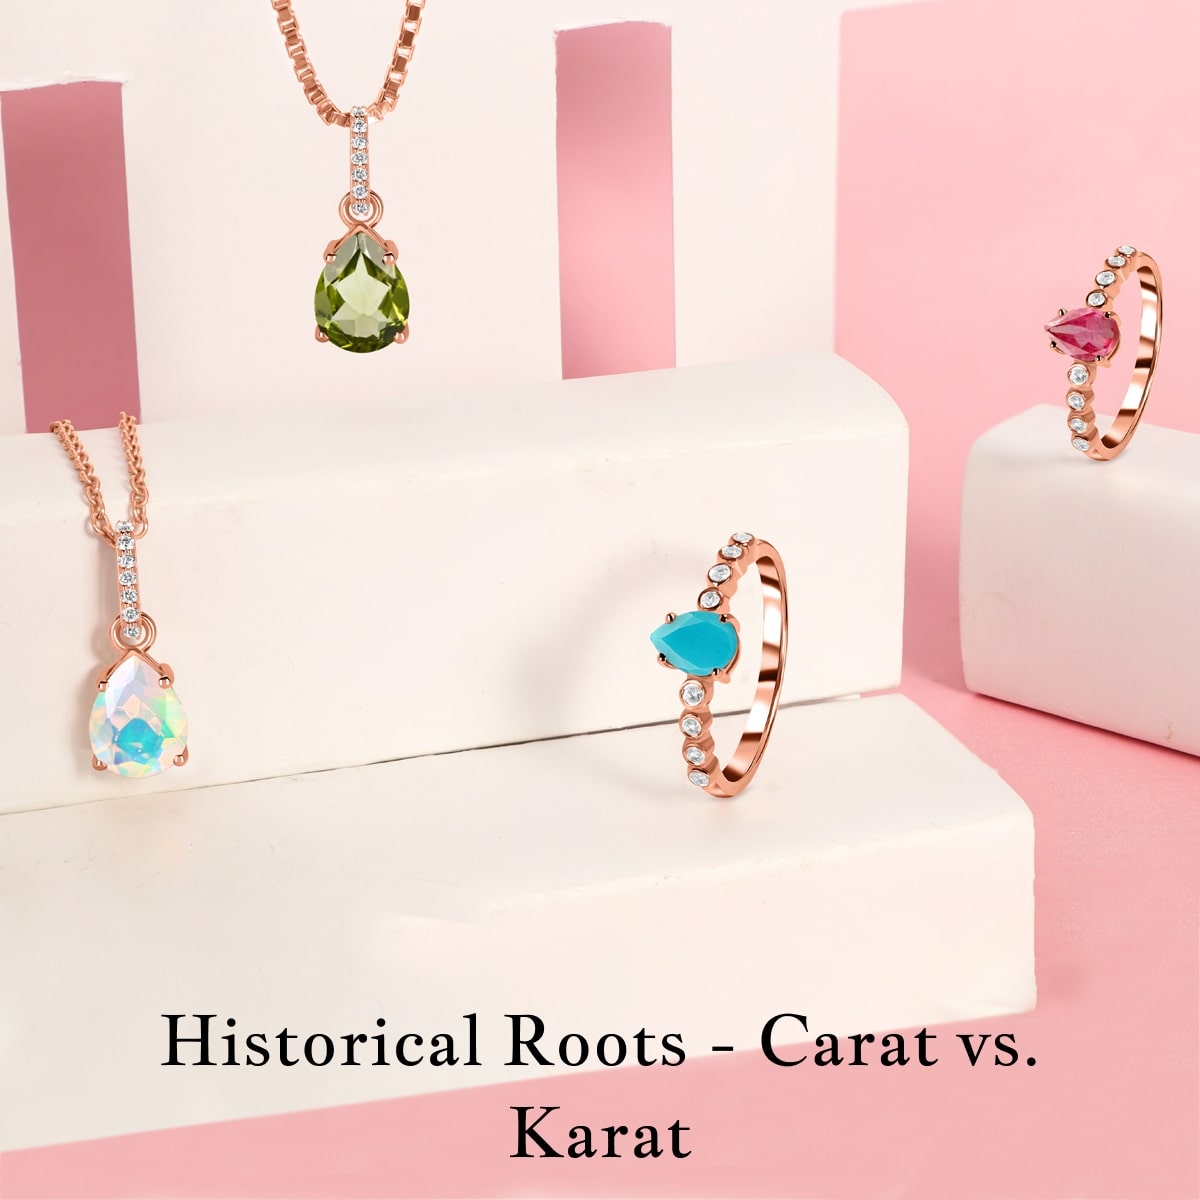 What Are the Origins of the Word Carat and Karat?